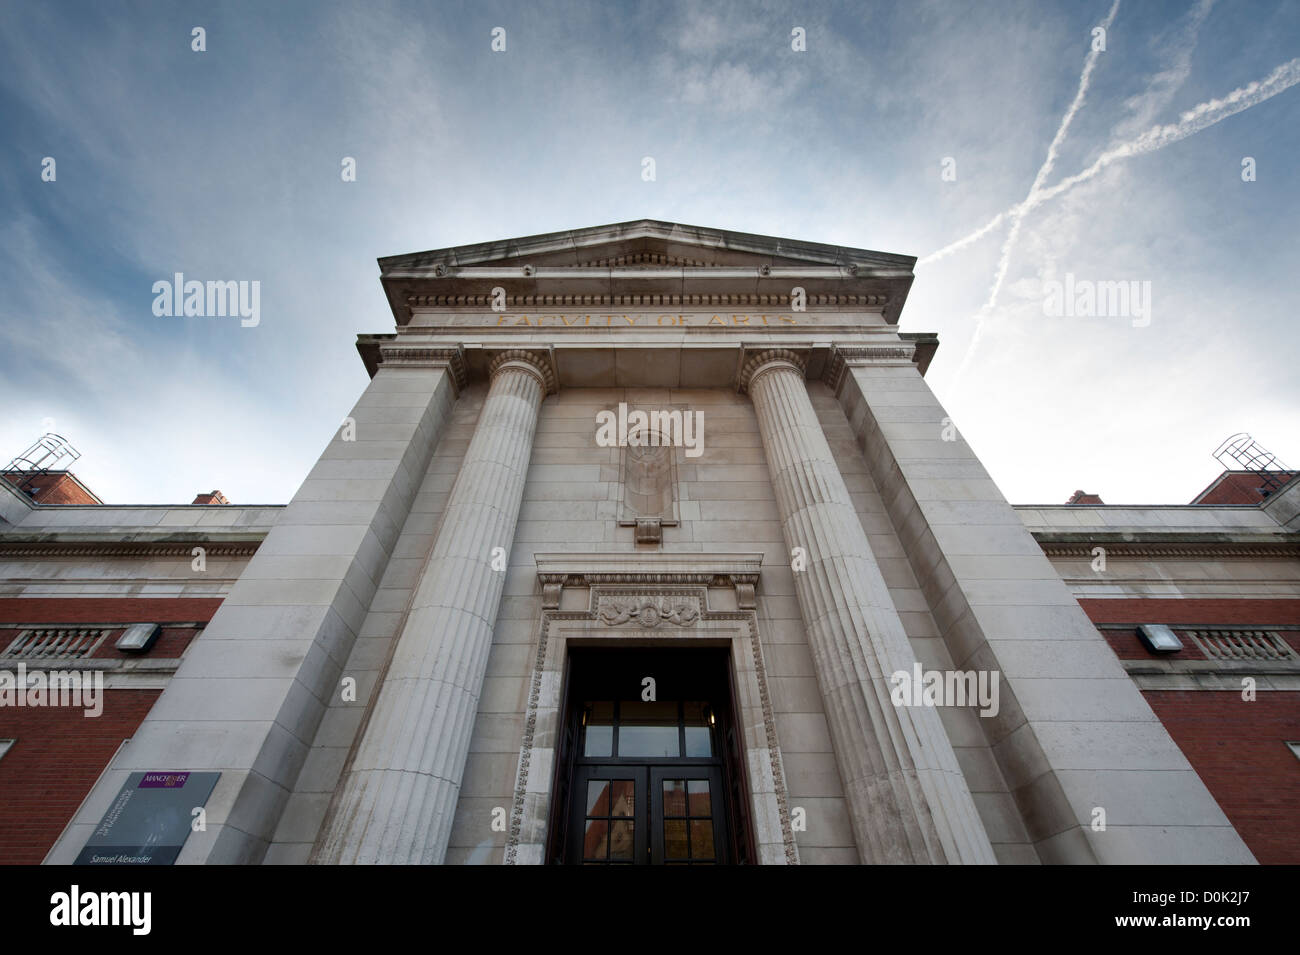 Looking up at the Samuel Alexander Building at the University of Manchester. Stock Photo